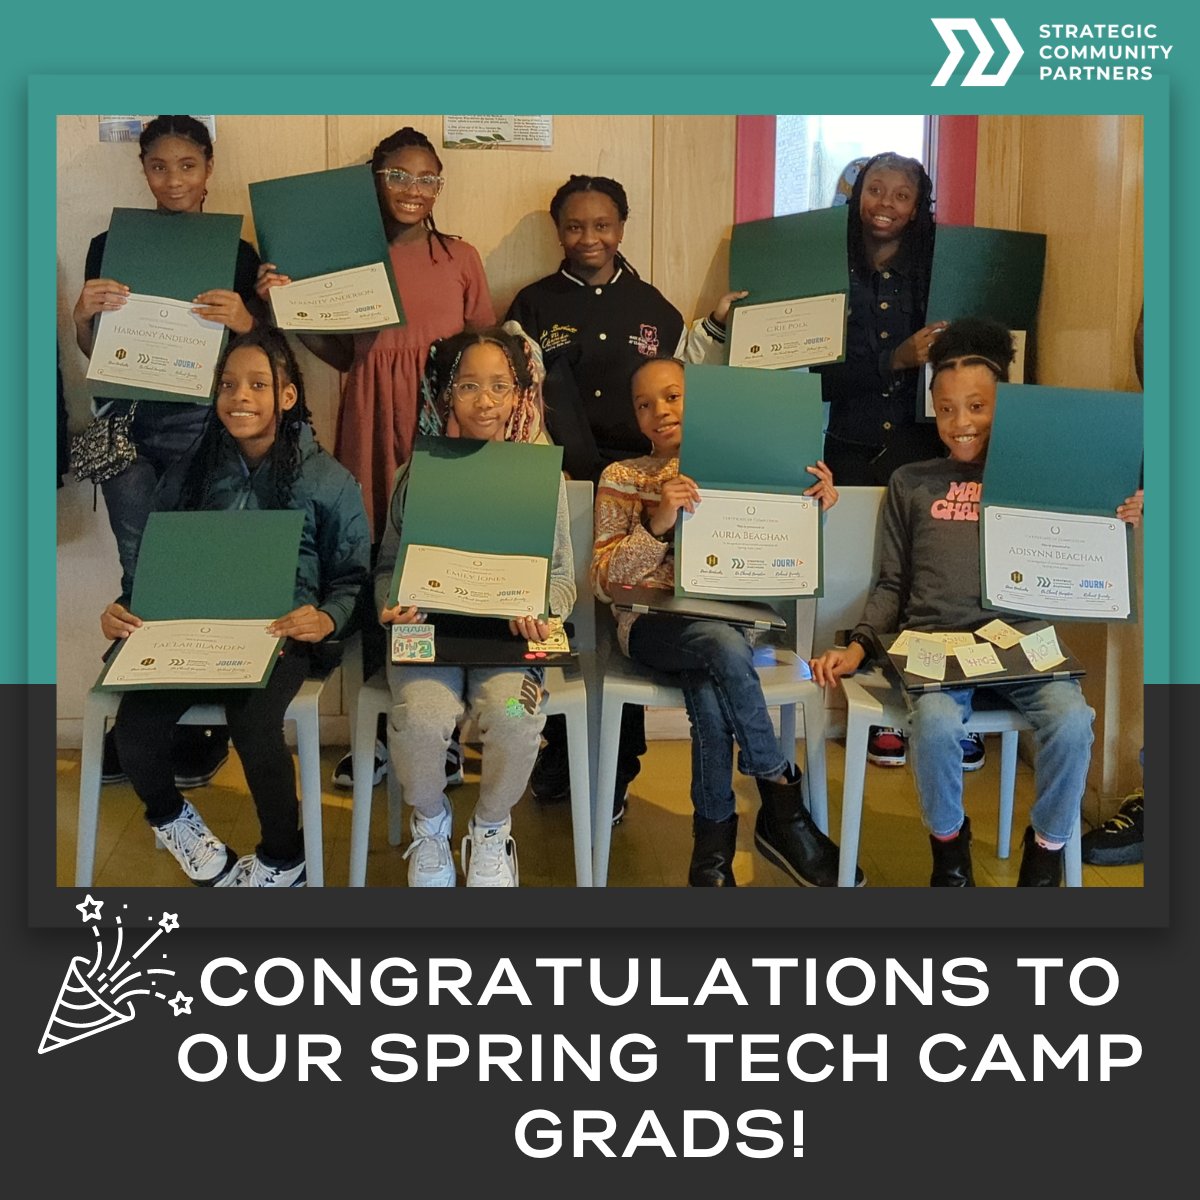 For #WomensHistoryMonth, we hosted a week-long spring tech camp for 8 amazing girls, empowering them to build & rebuild computers. 🖥️ At the end, they were gifted laptops to continue their tech journeys. 🚀 We are so proud of these future innovators! 💻 #GirlsInTech #STEM